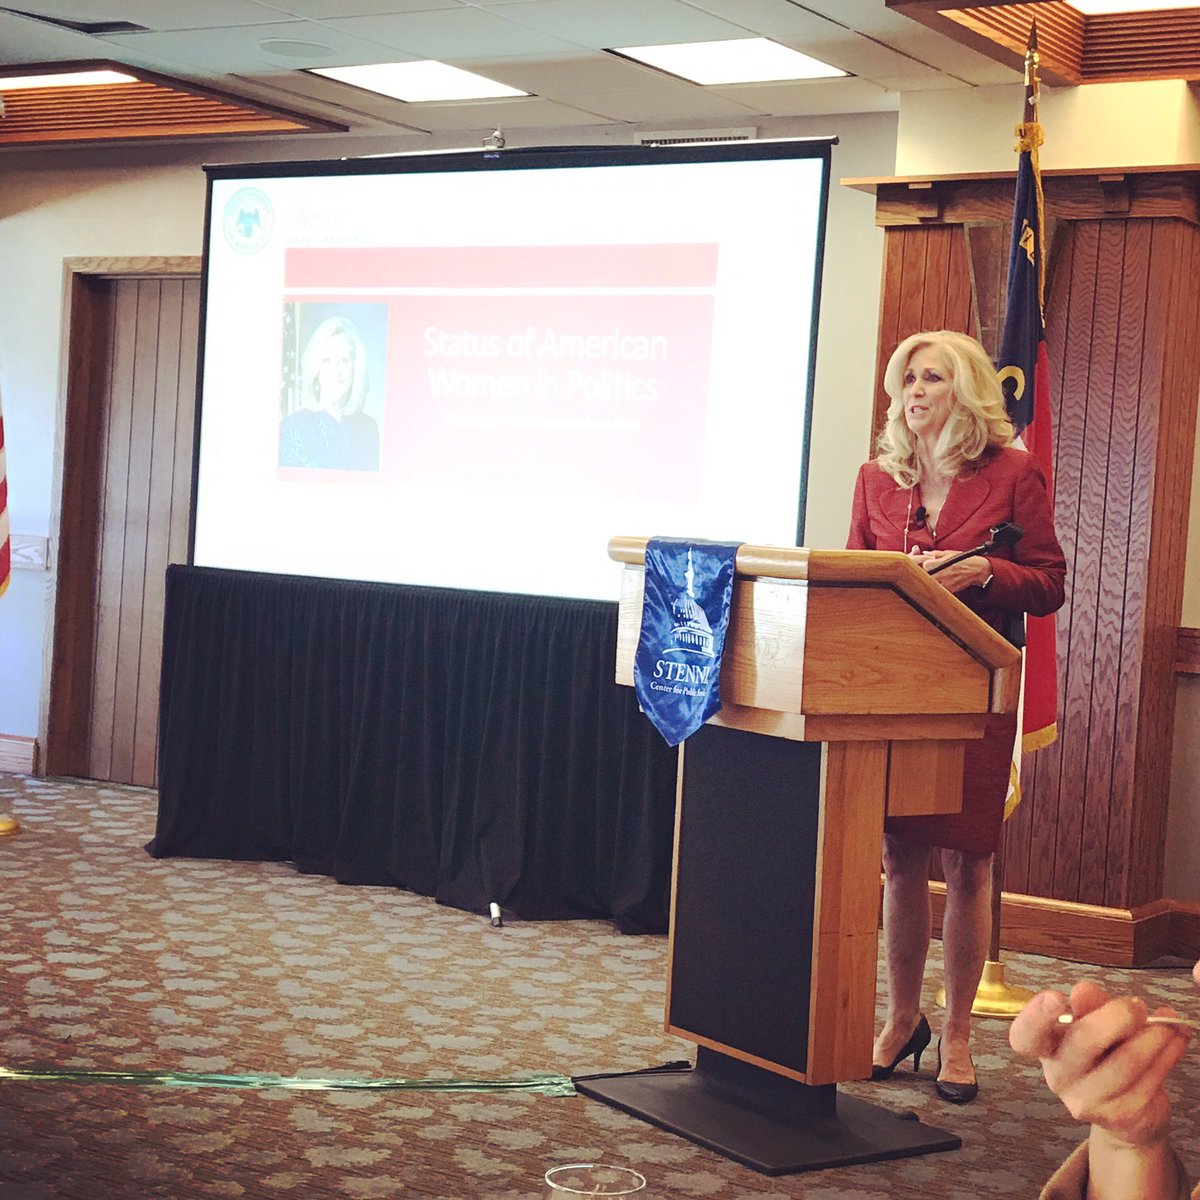 @LynnFitch briefing the attendees at the 2019 @StennisCenter Southern Women in Public Service Conference. “Providing service isn’t about party lines. It’s about doing the very best job for the people that elected you.” #SWIPS2019